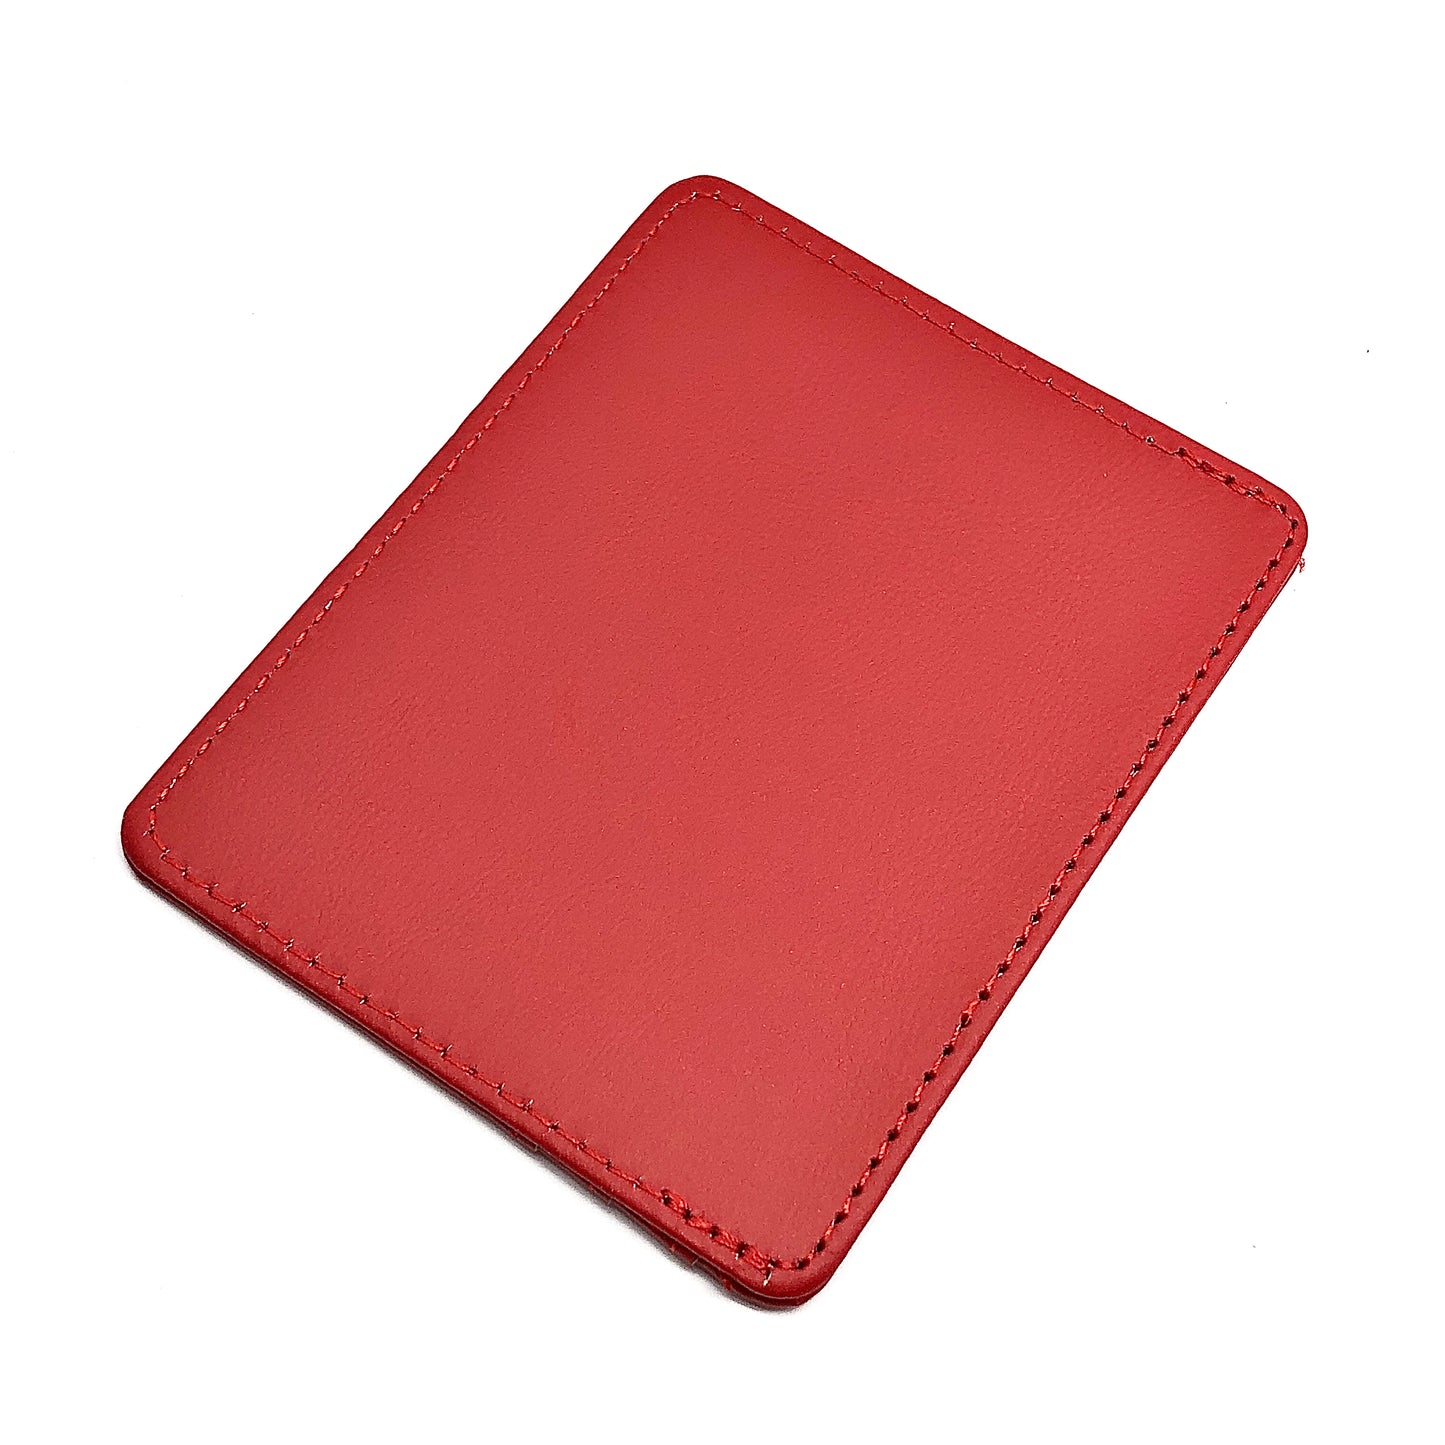 Red Faux Leather Slim Profile Wallet / Credit Card Holder